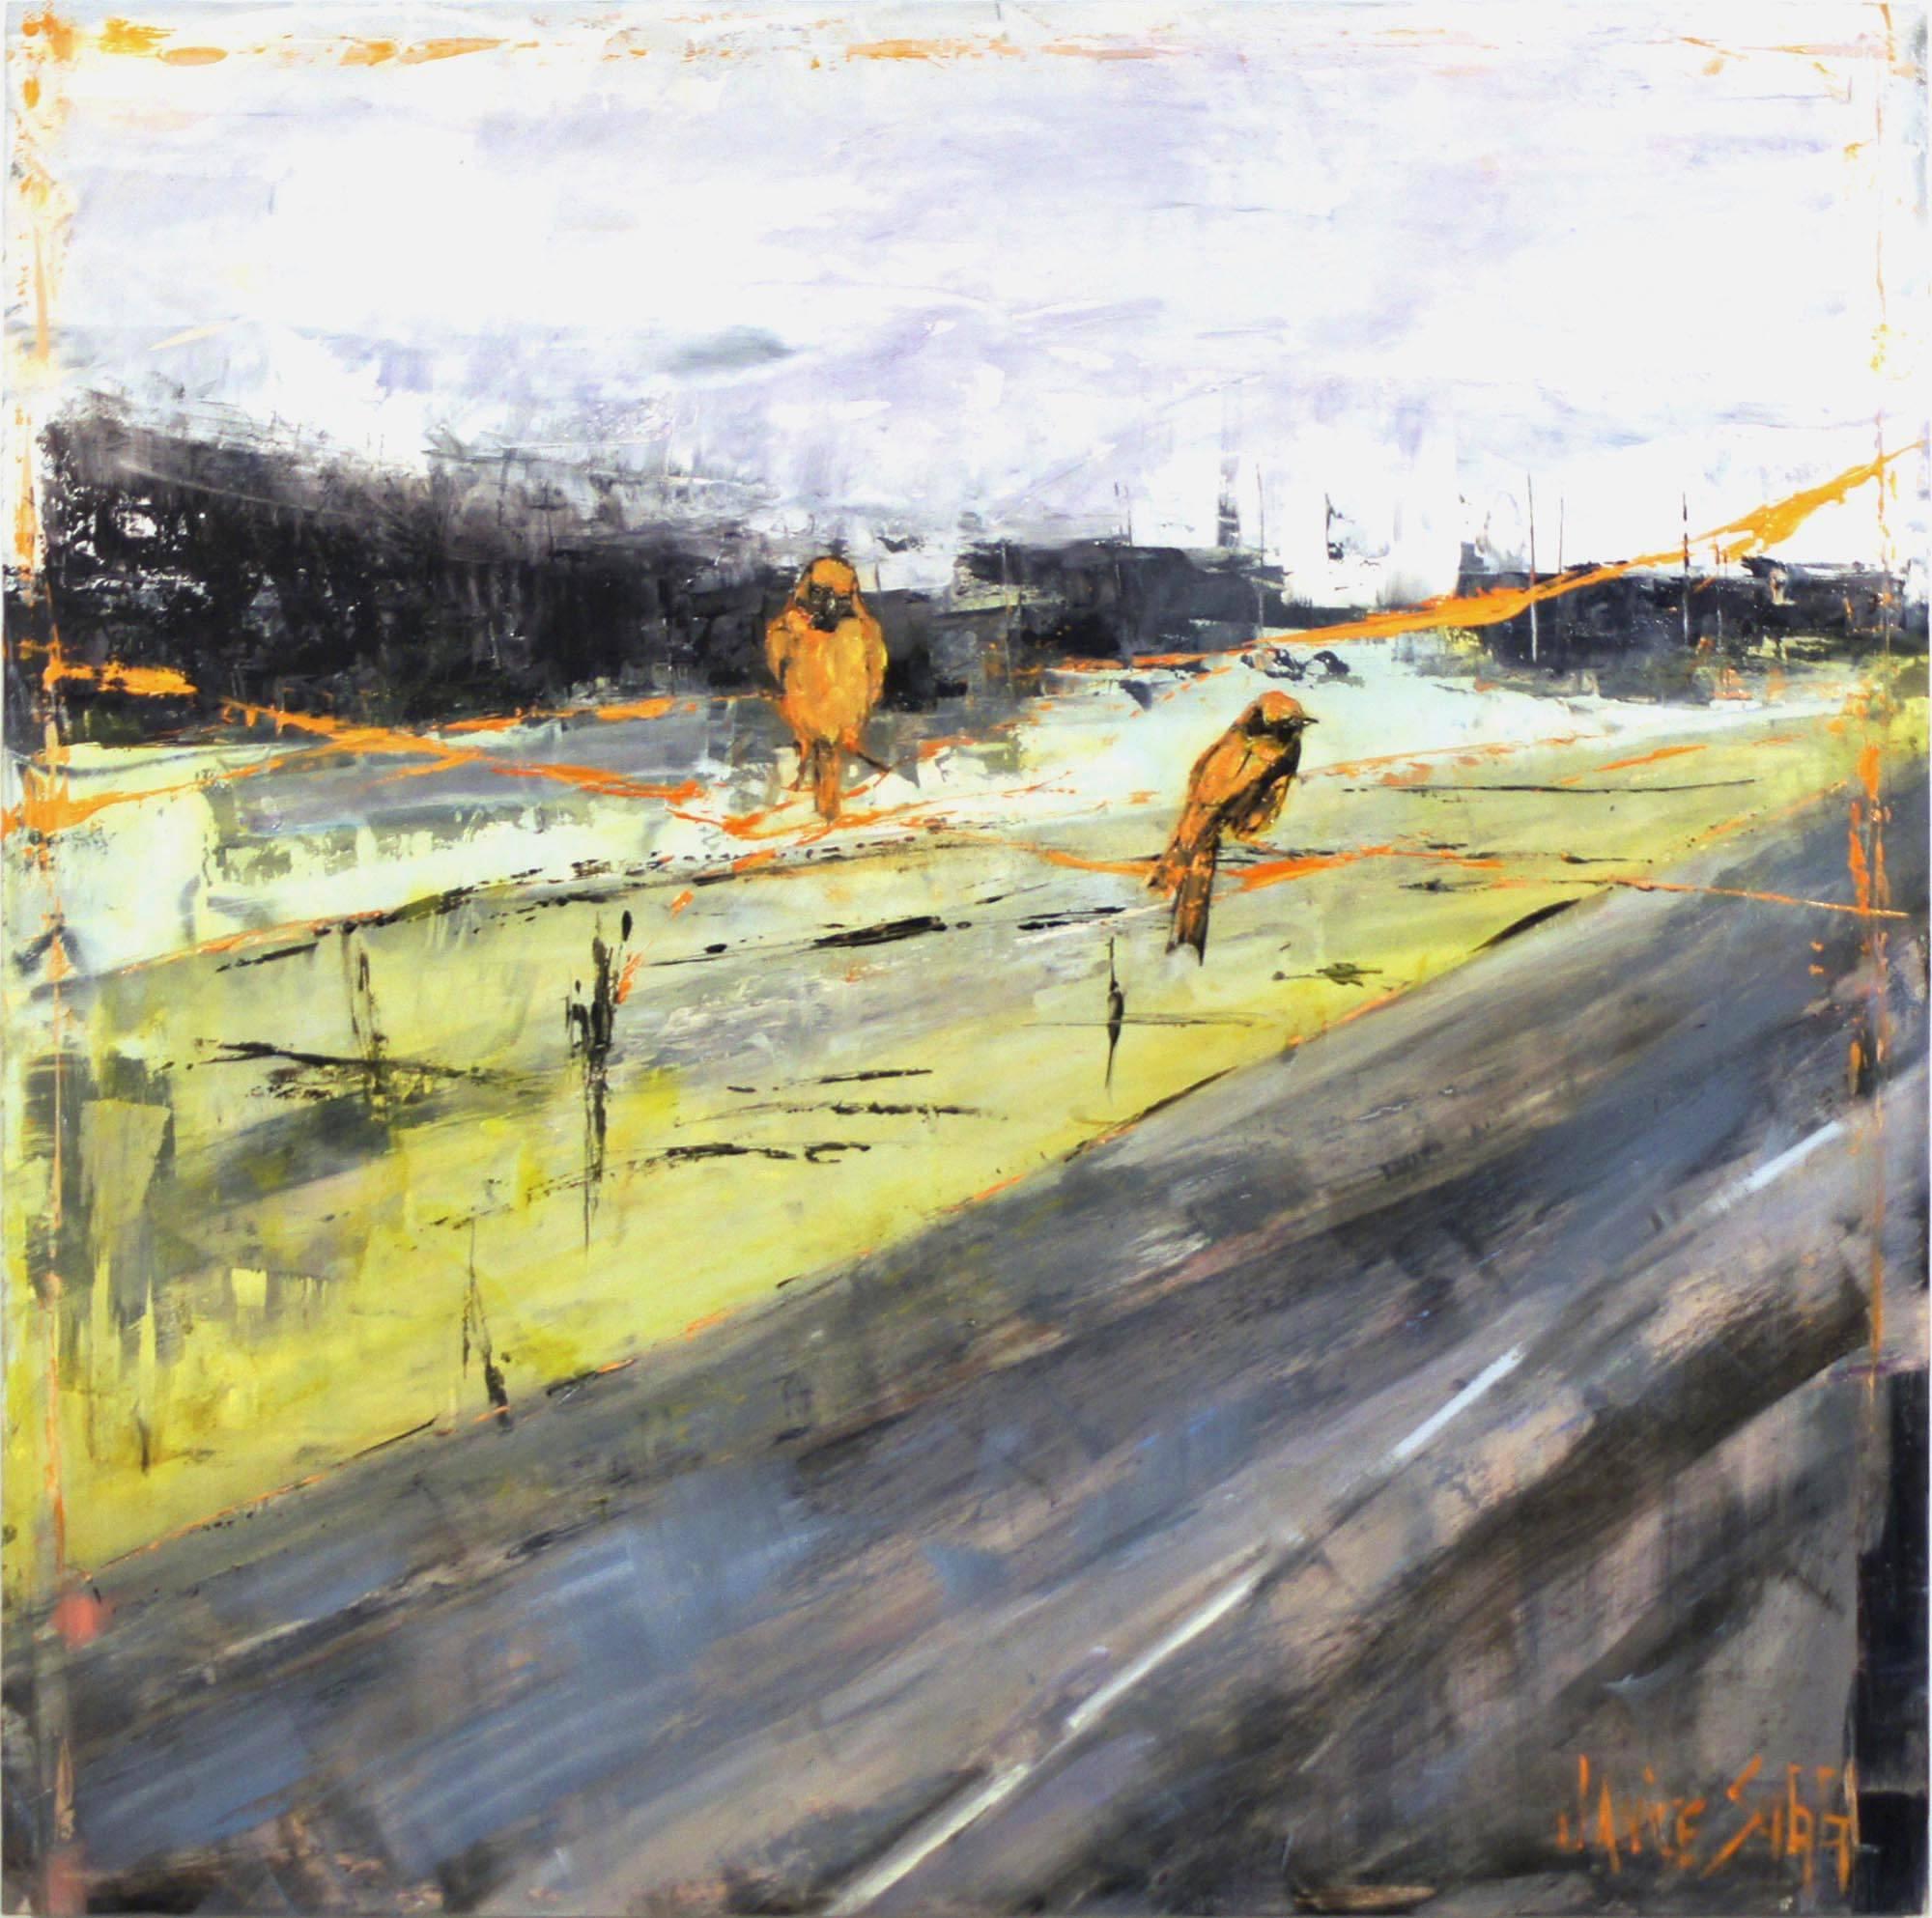 Janice Sugg Animal Painting - Urban Abstract Wildlife Painting 'Passages, Birds Observing' Oil on Board